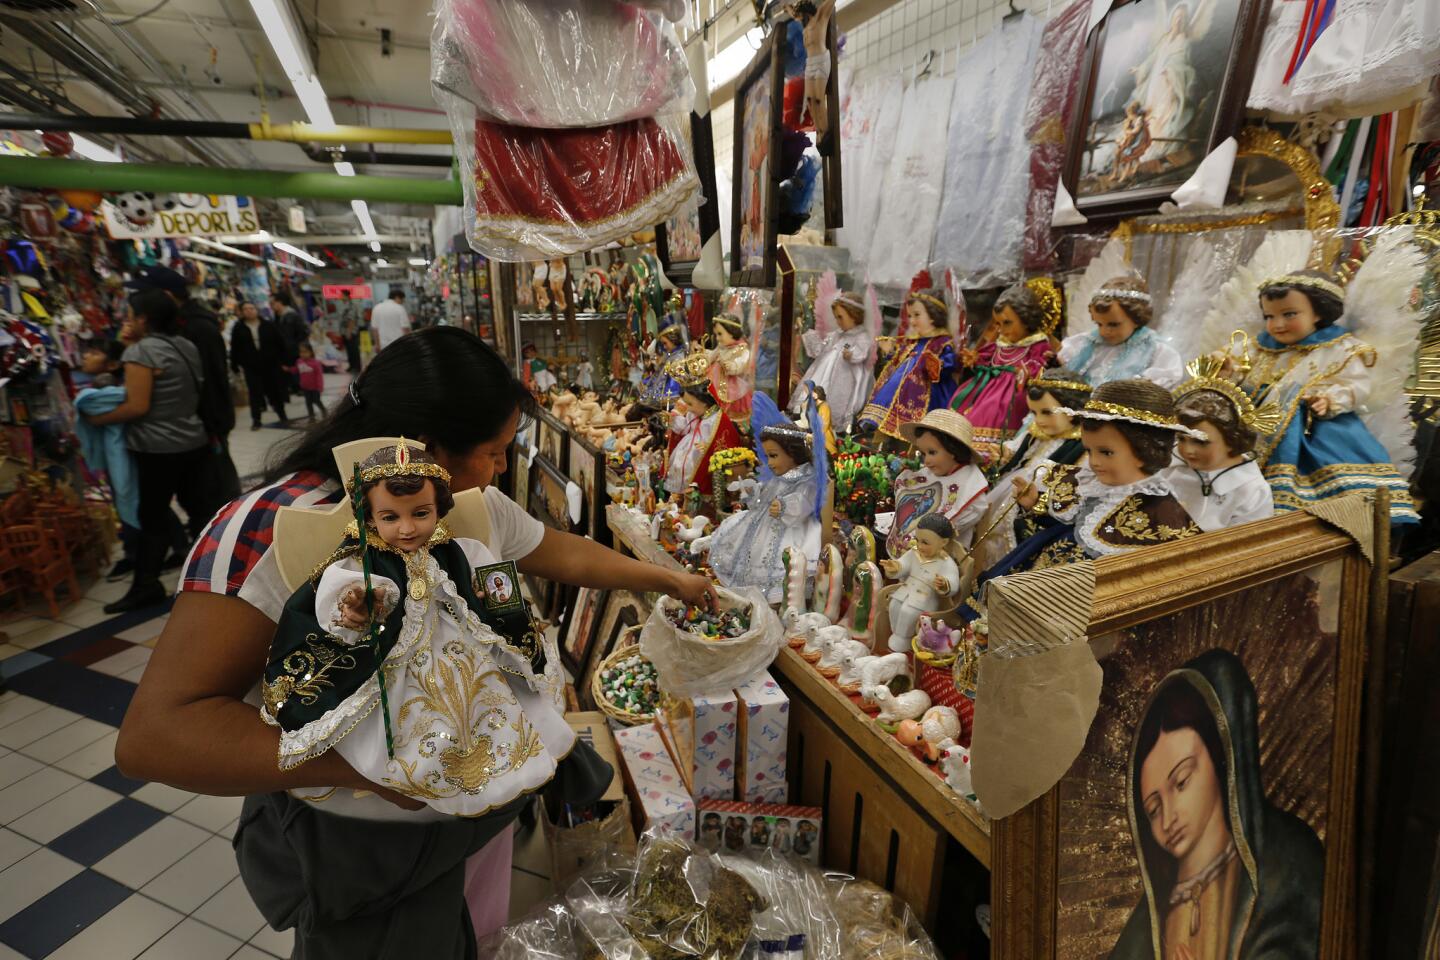 Rosario Gonzalez holds her baby Jesus doll that was repaired and dressed as Saint Judas Thaddaeus, the patron saint of hope, at Que Linda General Store in Boyle Heights for infant Christ's first church visit on Candlemas, Feb. 2.